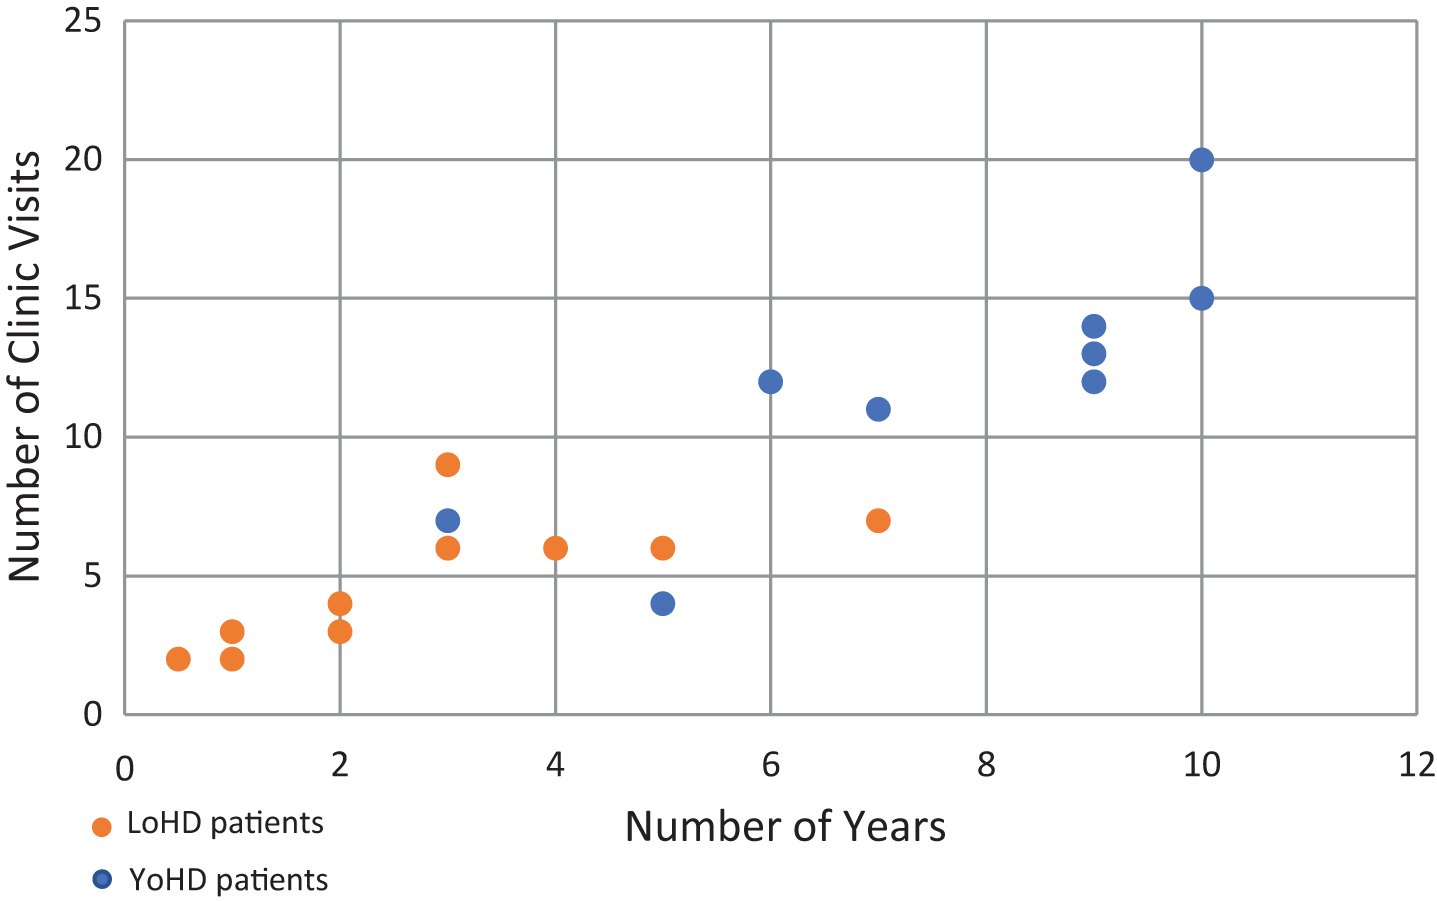 Scatter plot showing the number of visits a patient made to the HD clinic against the number of years over which those visits were made. Orange circles show LoHD patients, while blue circles show YoHD patients. The average number of visits made was 4.17 (s = 2.11) for LoHD patients and 9.75 (s = 5.40) for YoHD. These were made over an average period of 2.31 years (s = 1.71) for LoHD patients and 6 years (s = 3.37) for YoHD patients.